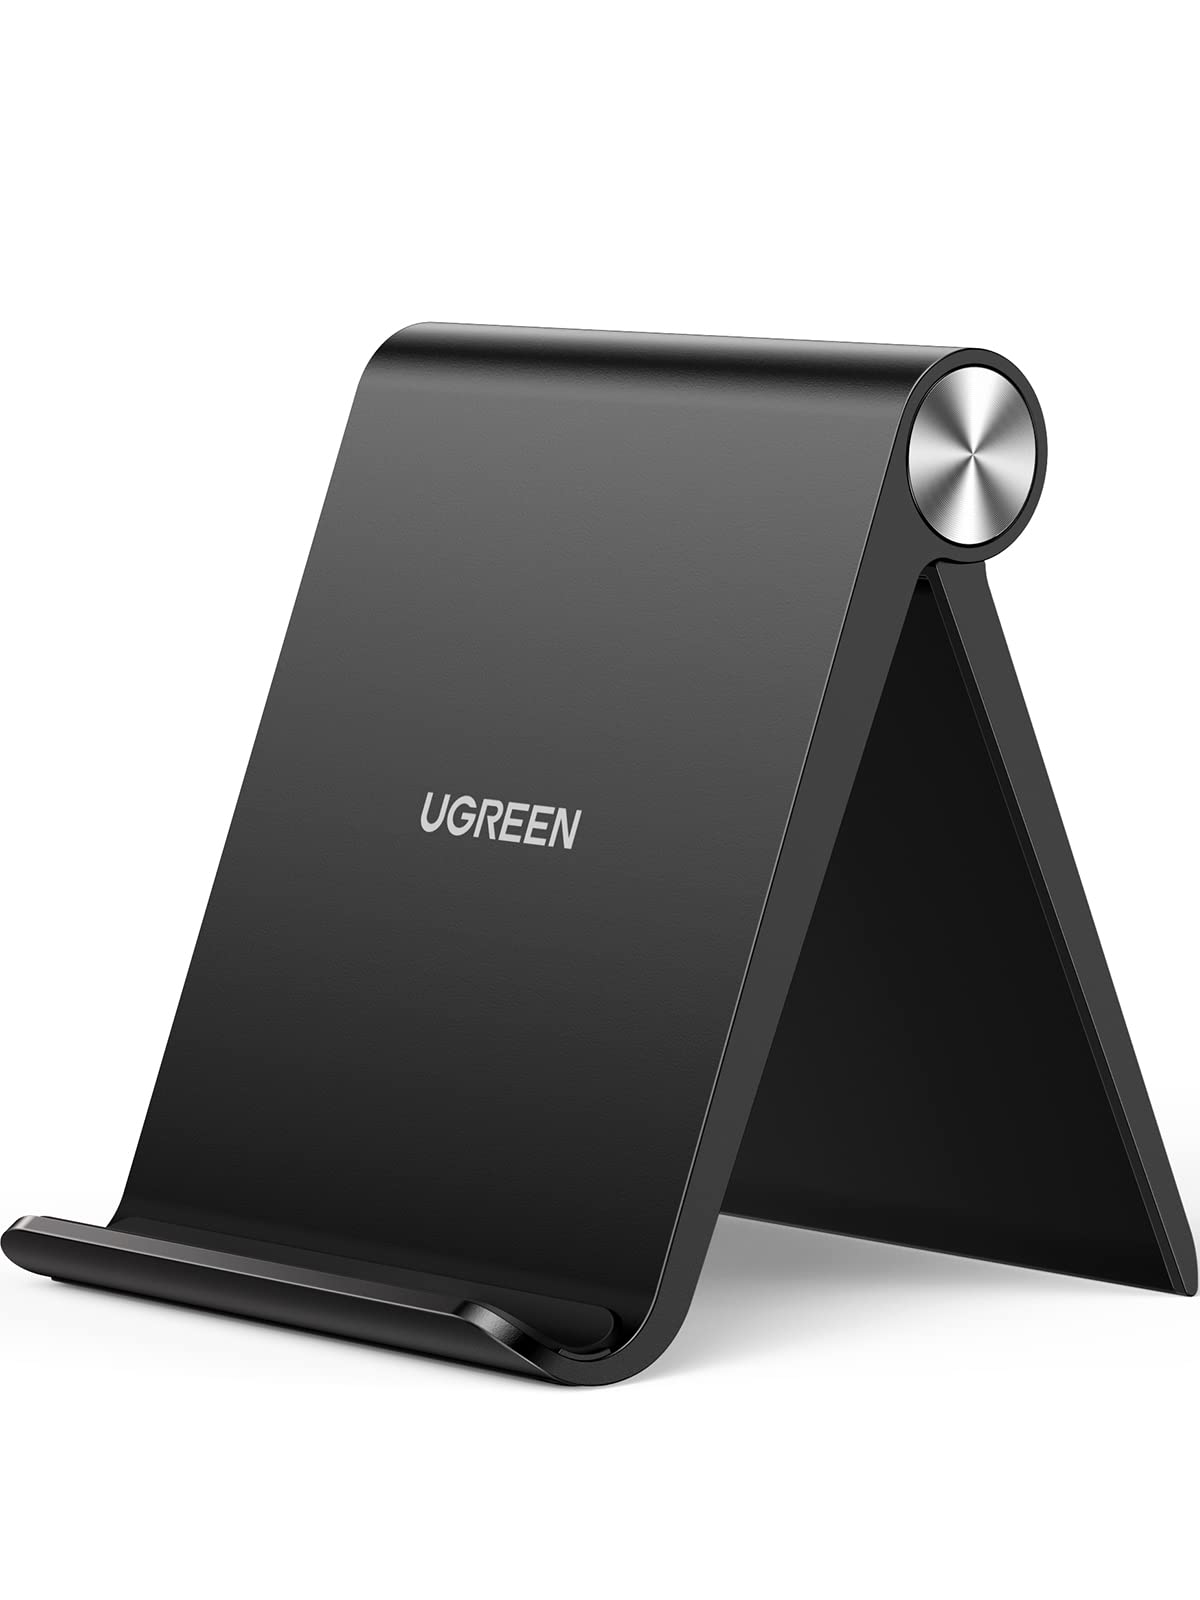 UGREEN Portable Phone Stand Desk Phone Holder, Stable Mobile Phone Stand Holder Compatible for Most Phones, iPhone 15 Pro/Pro Max, Samsung Galaxy, Tablet/iPad Black 4-7.9"